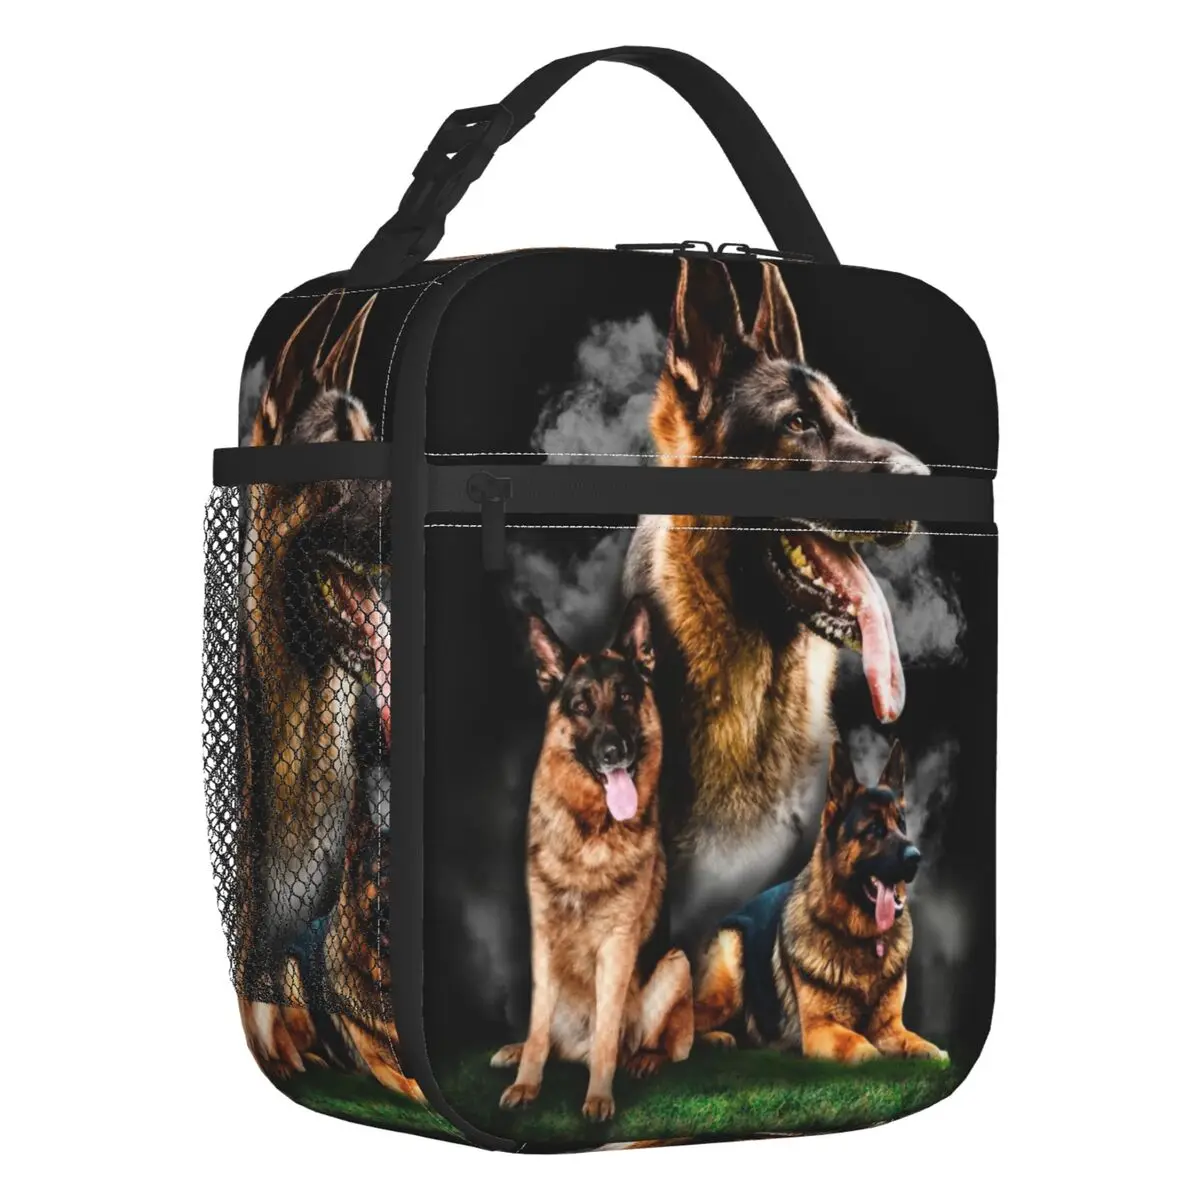 German Shepherd Dog Insulated Lunch Bag for Women Portable GSD Animal Wolf Dog Thermal Cooler Lunch Tote Kids School Children